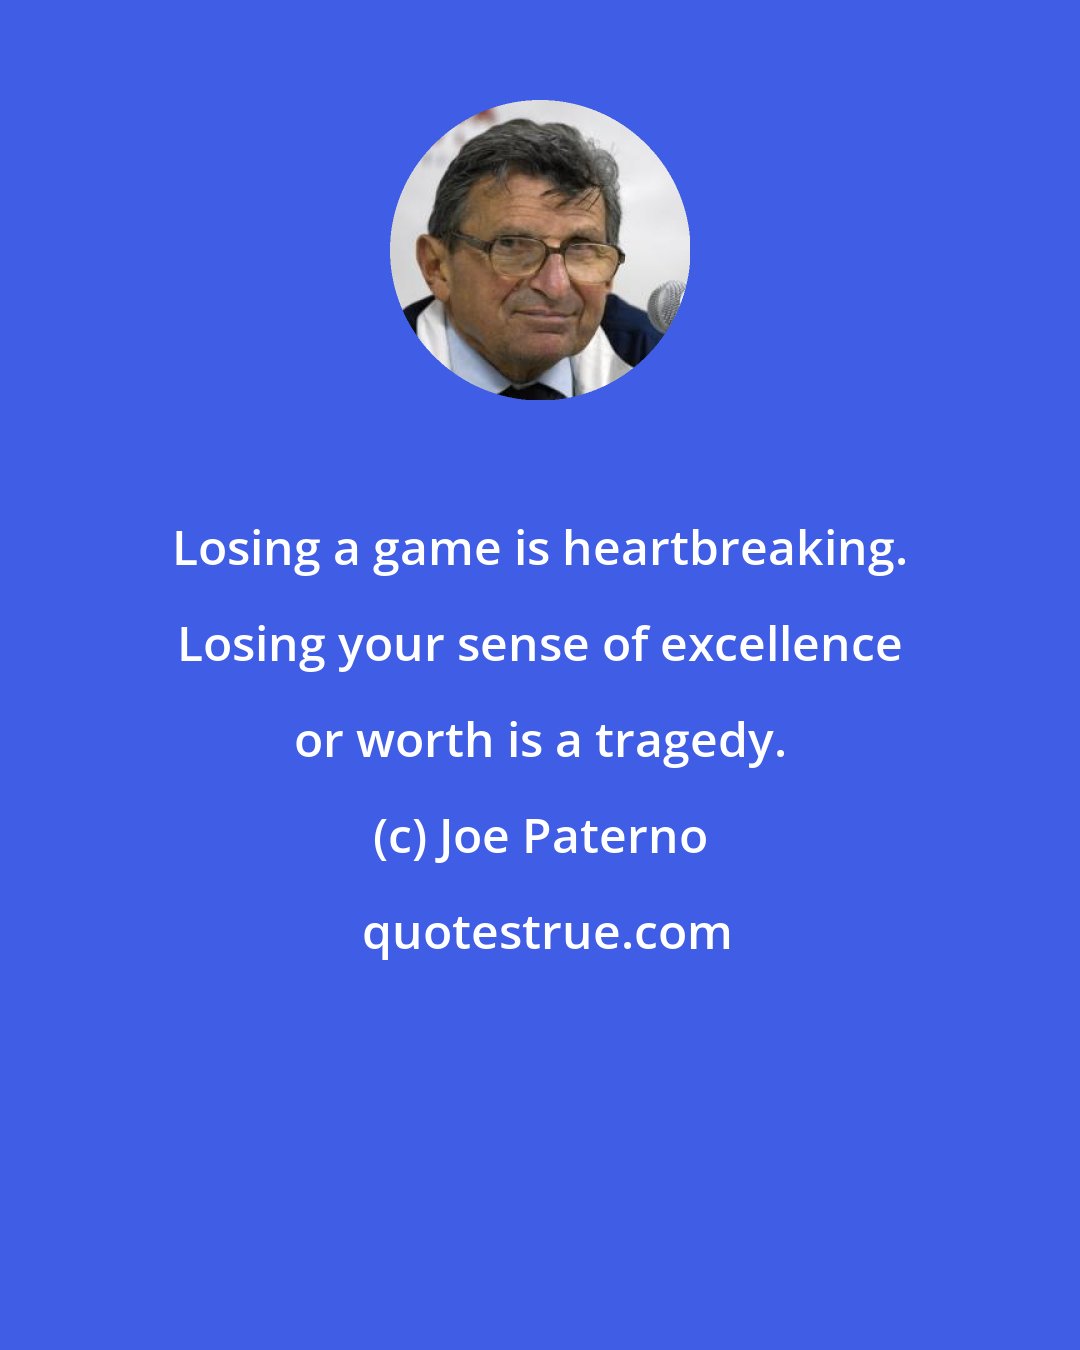 Joe Paterno: Losing a game is heartbreaking. Losing your sense of excellence or worth is a tragedy.